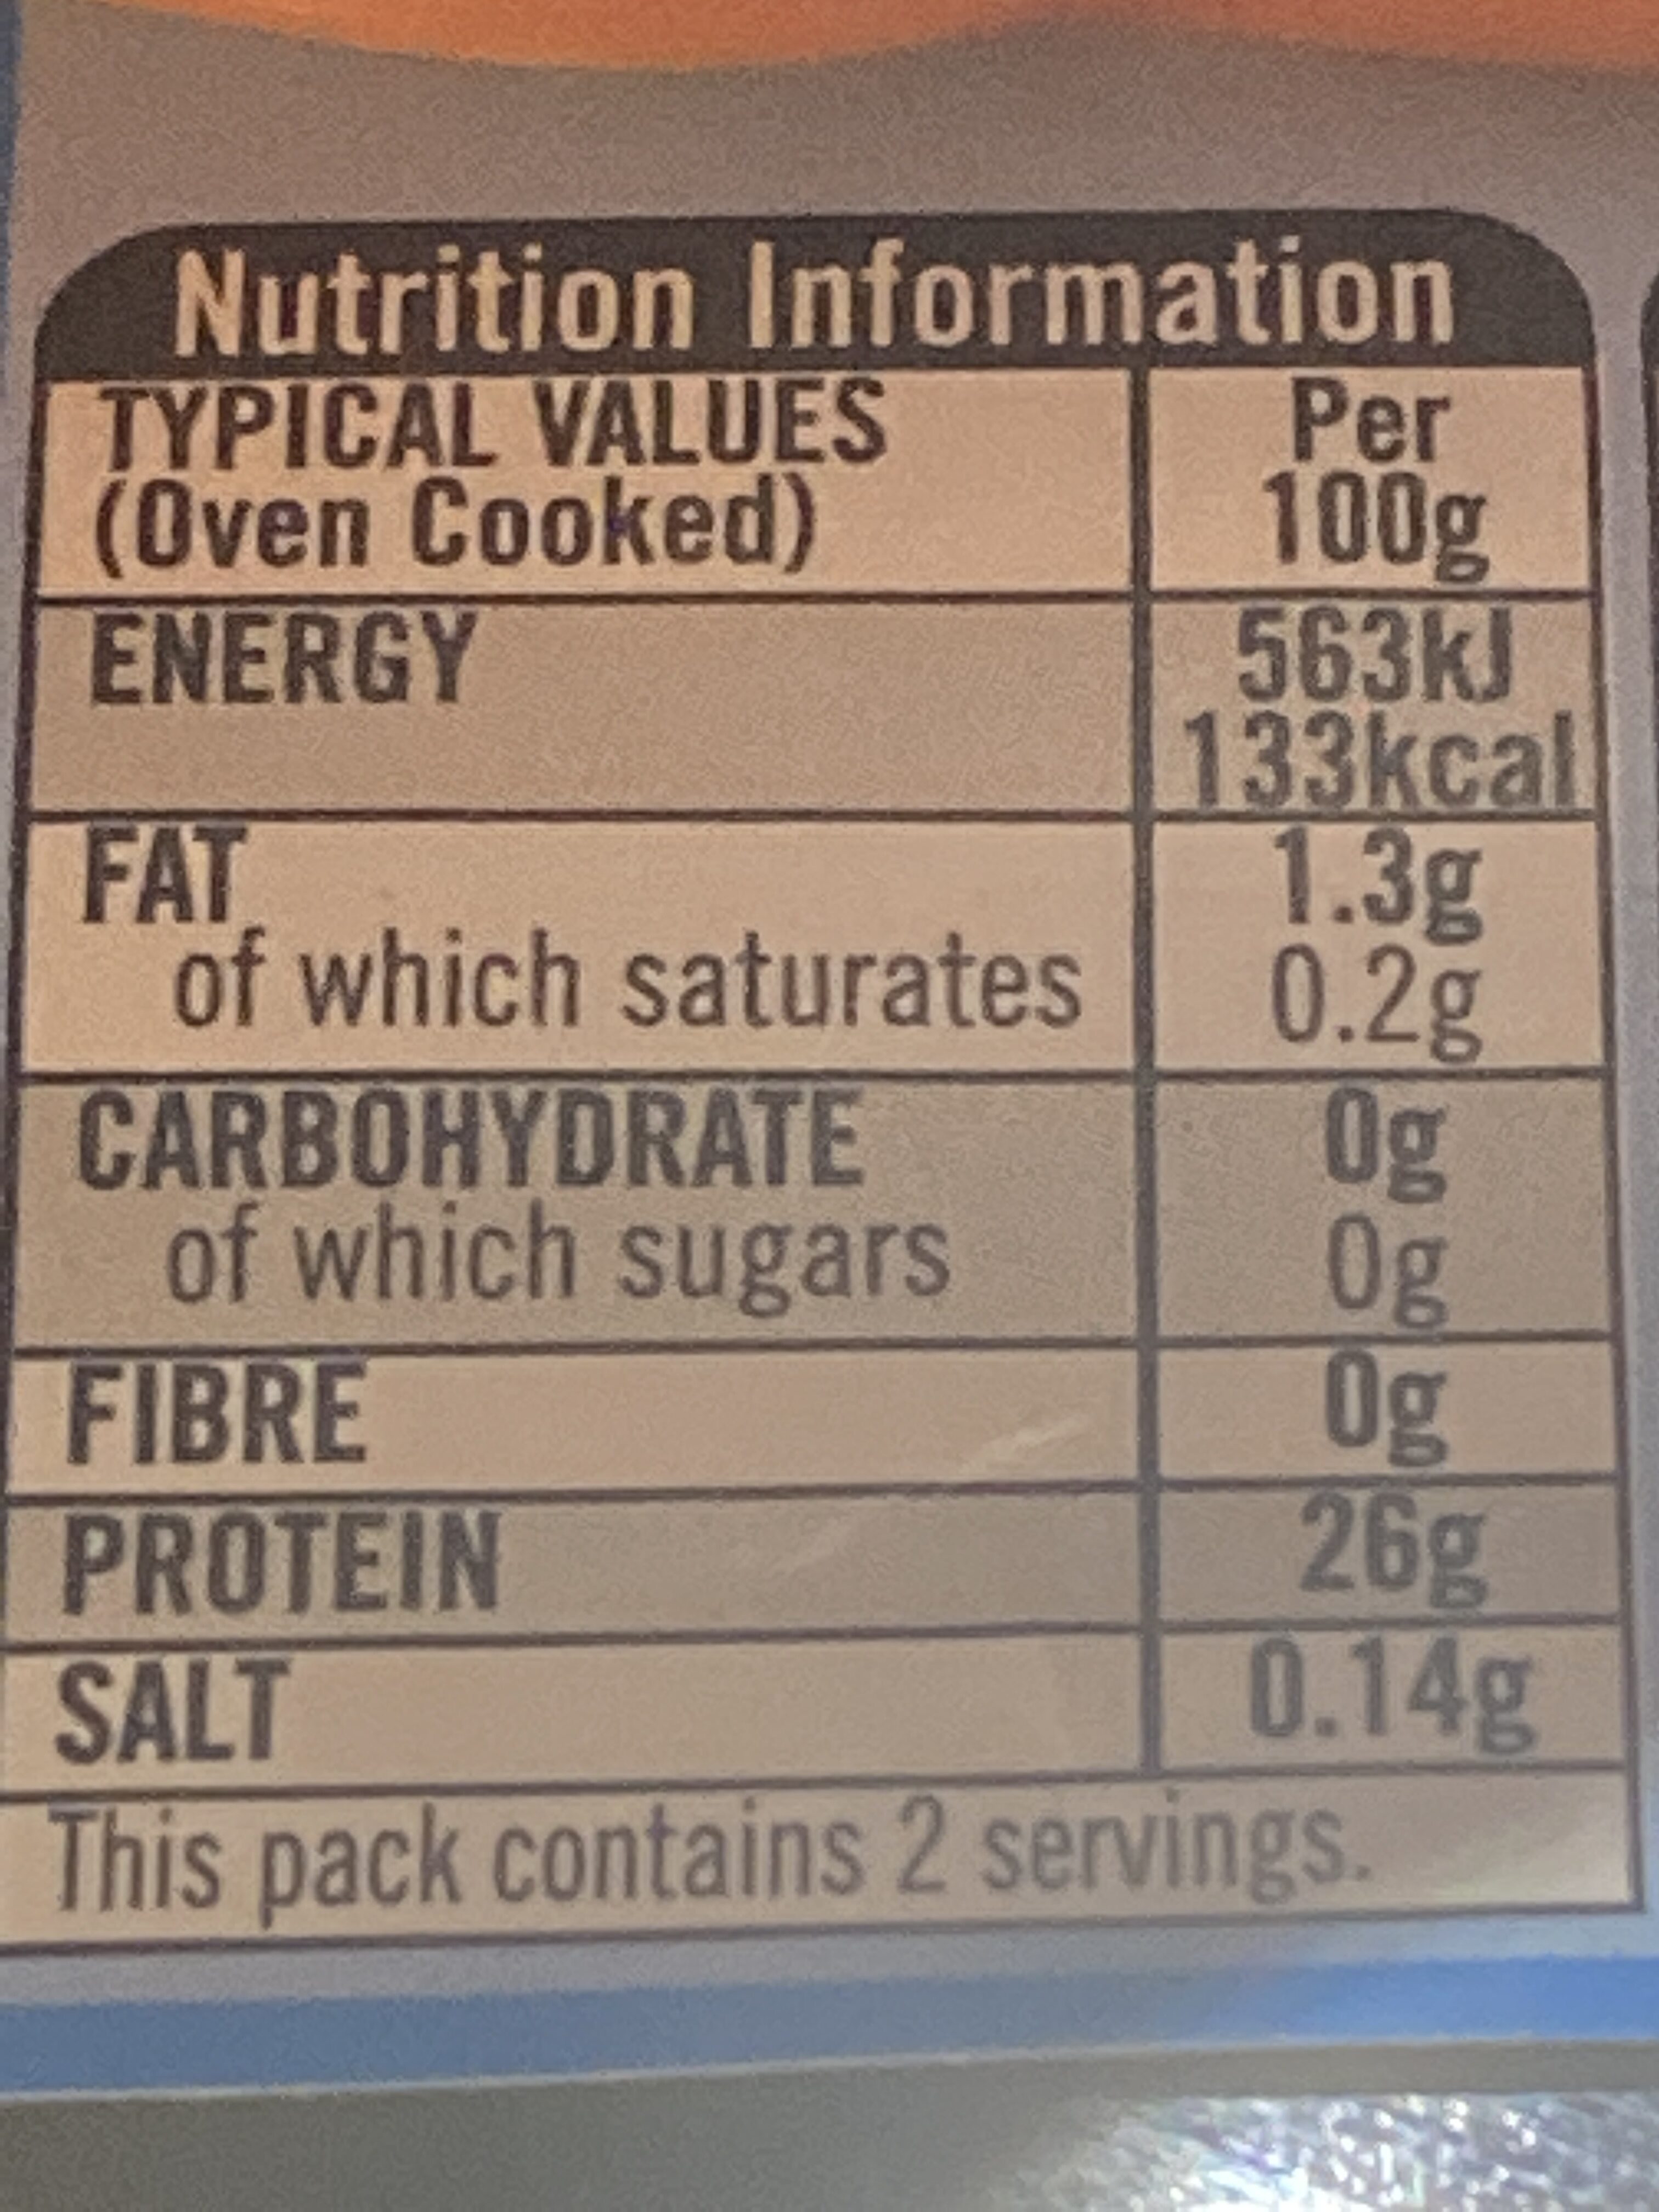 Cod lions - Nutrition facts